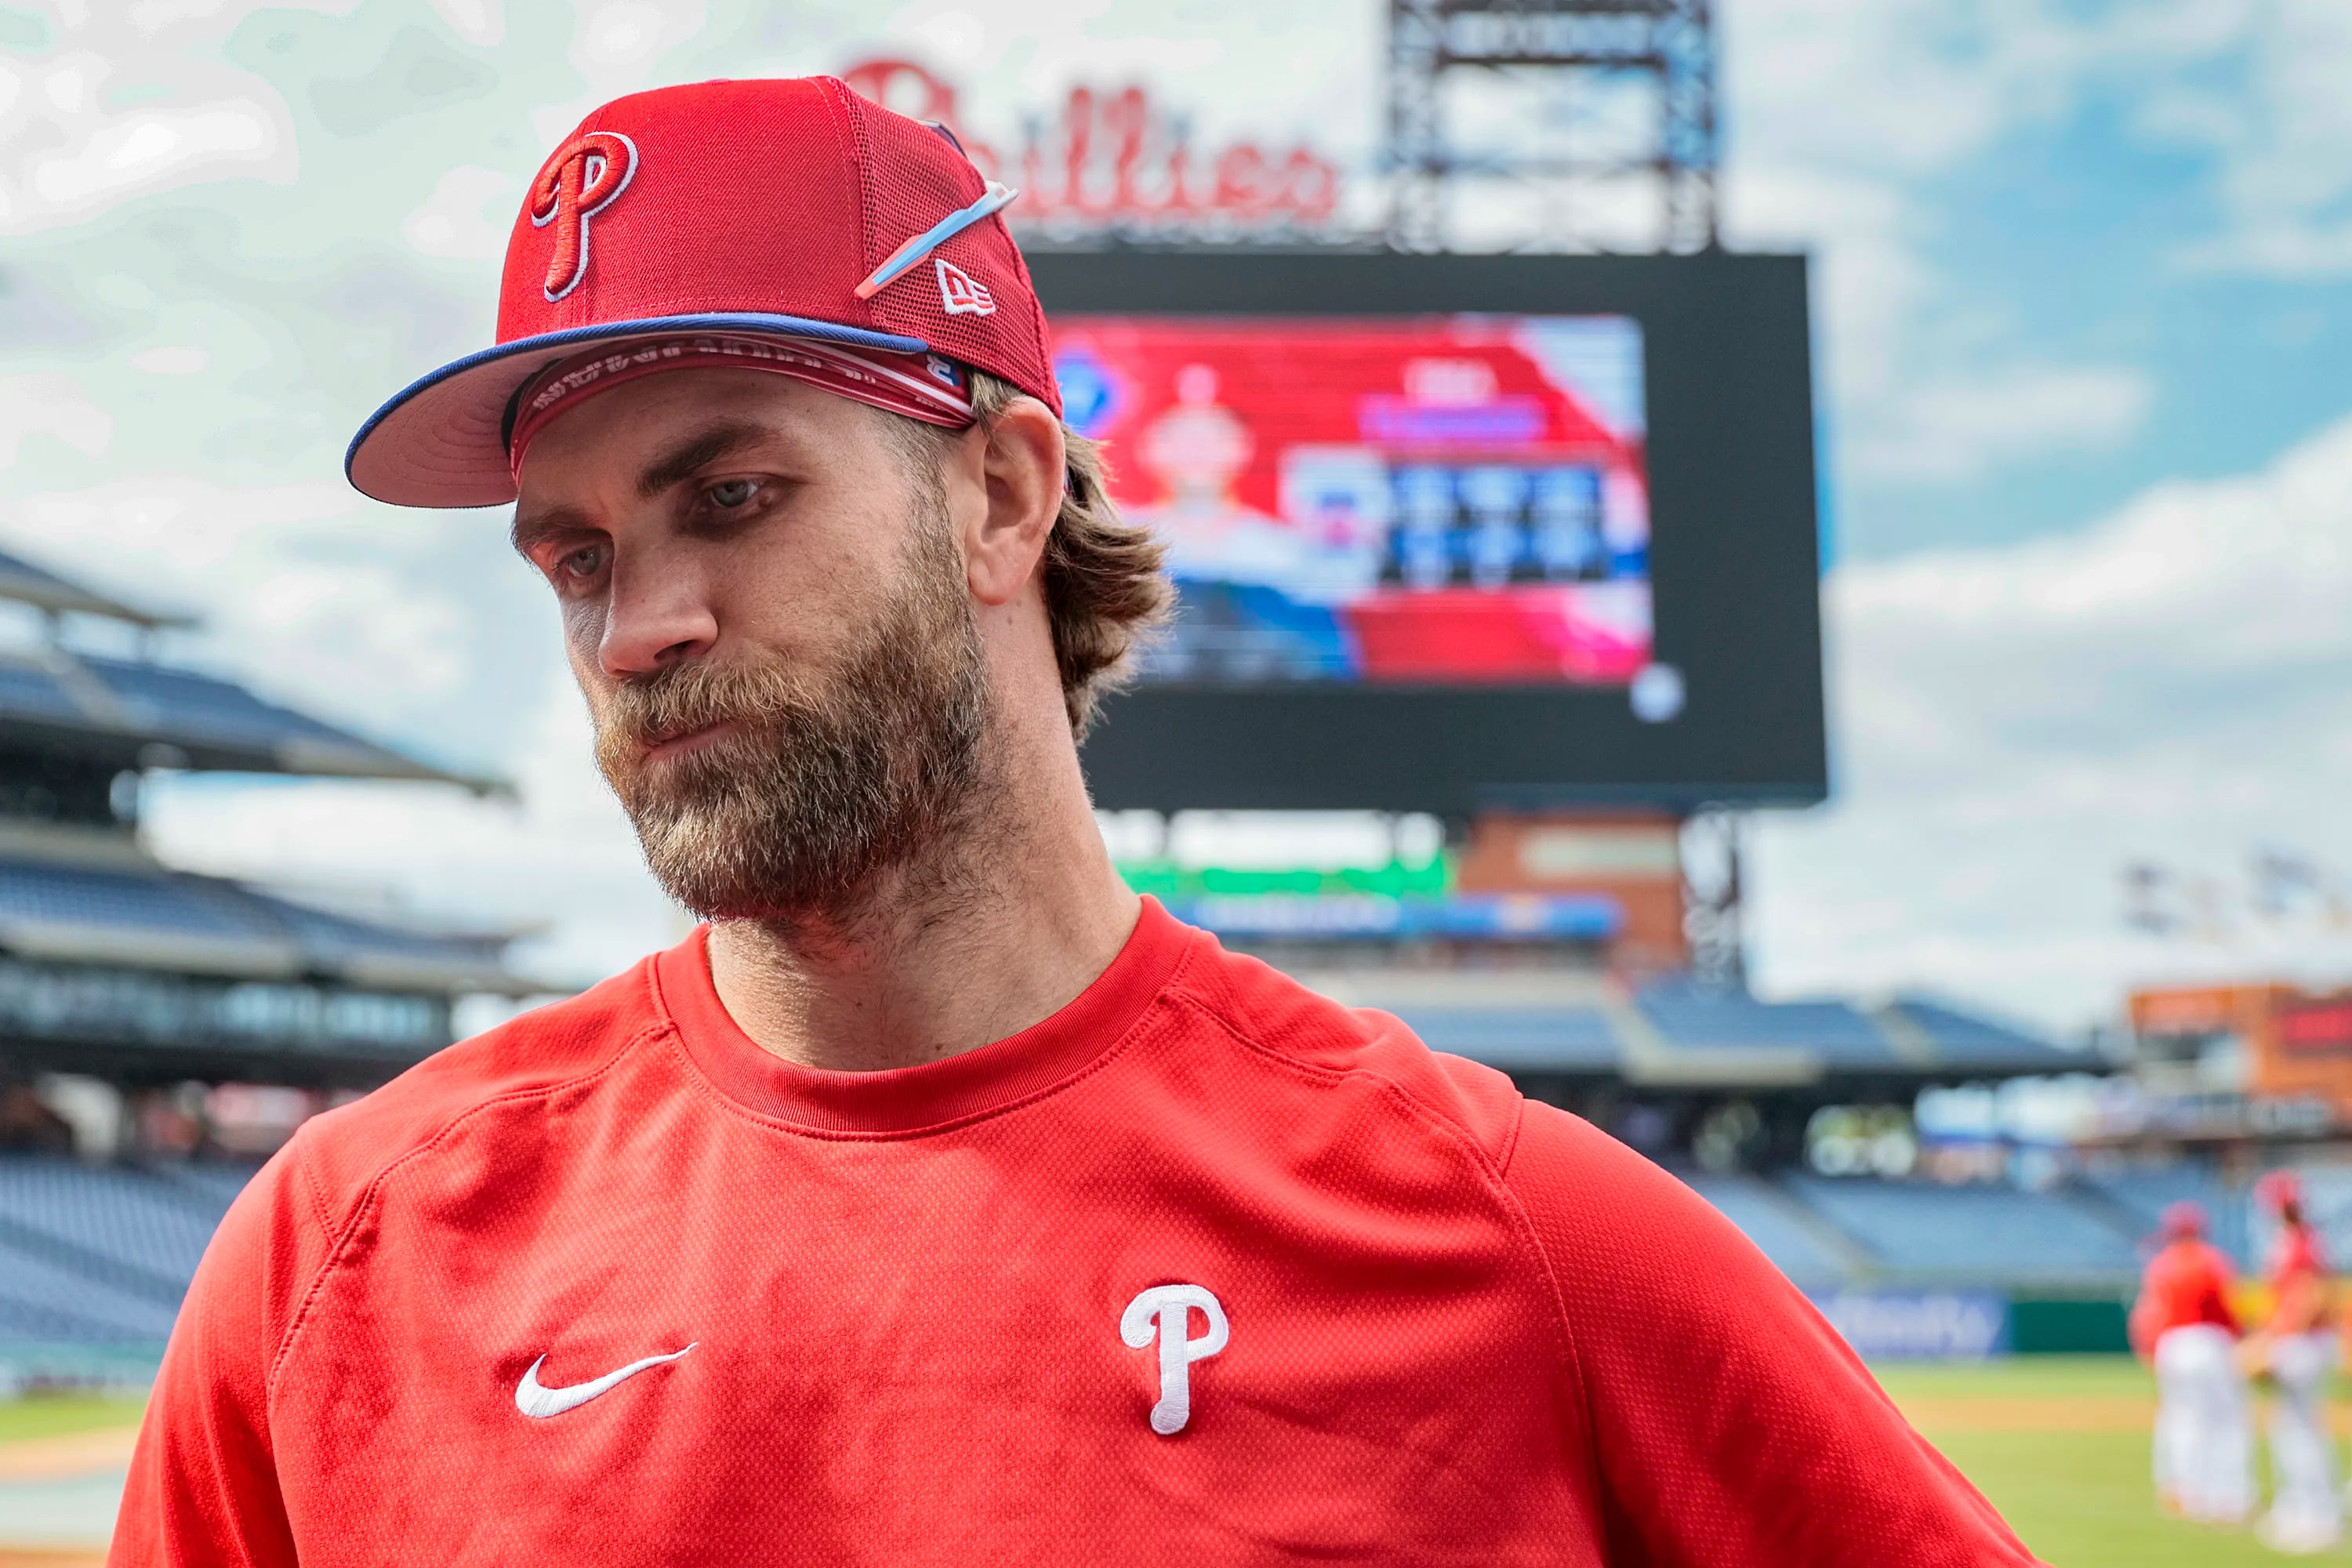 Bryce Harper may bypass minor-league rehab assignment in return to Phillies